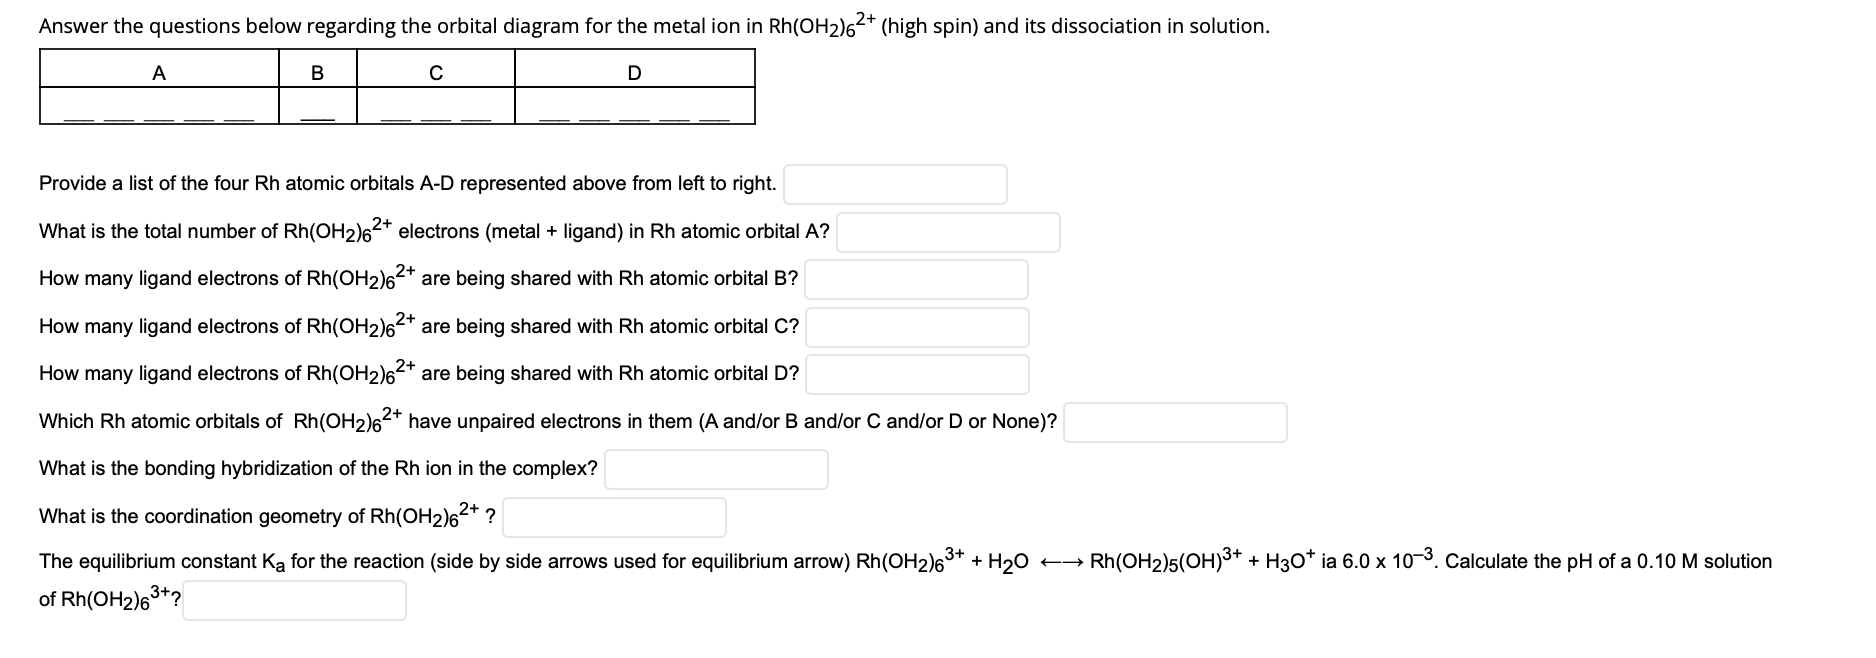 Answer the questions below regarding the orbital diagram for the metal ion in Rh(OH2)6²* (high spin) and its dissociation in solution.
A
Provide a list of the four Rh atomic orbitals A-D represented above from left to right.
What is the total number of Rh(OH2)62* electrons (metal + ligand) in Rh atomic orbital A?
How many ligand electrons of Rh(OH2)62* are being shared with Rh atomic orbital B?
How many ligand electrons of Rh(OH2)62* are being shared with Rh atomic orbital C?
How many ligand electrons of Rh(OH2)62* are being shared with Rh atomic orbital D?
Which Rh atomic orbitals of Rh(OH2)62* have unpaired electrons in them (A and/or B and/or C and/or D or None)?
What is the bonding hybridization of the Rh ion in the complex?
What is the coordination geometry of Rh(OH2)62* ?
The equilibrium constant Ka for the reaction (side by side arrows used for equilibrium arrow) Rh(OH2)6** + H20
Rh(OH2)5(OH)3+ + H3O* ia 6.0 x 10-3. Calculate the pH of a 0.10
solution
of Rh(OH2)63+?
